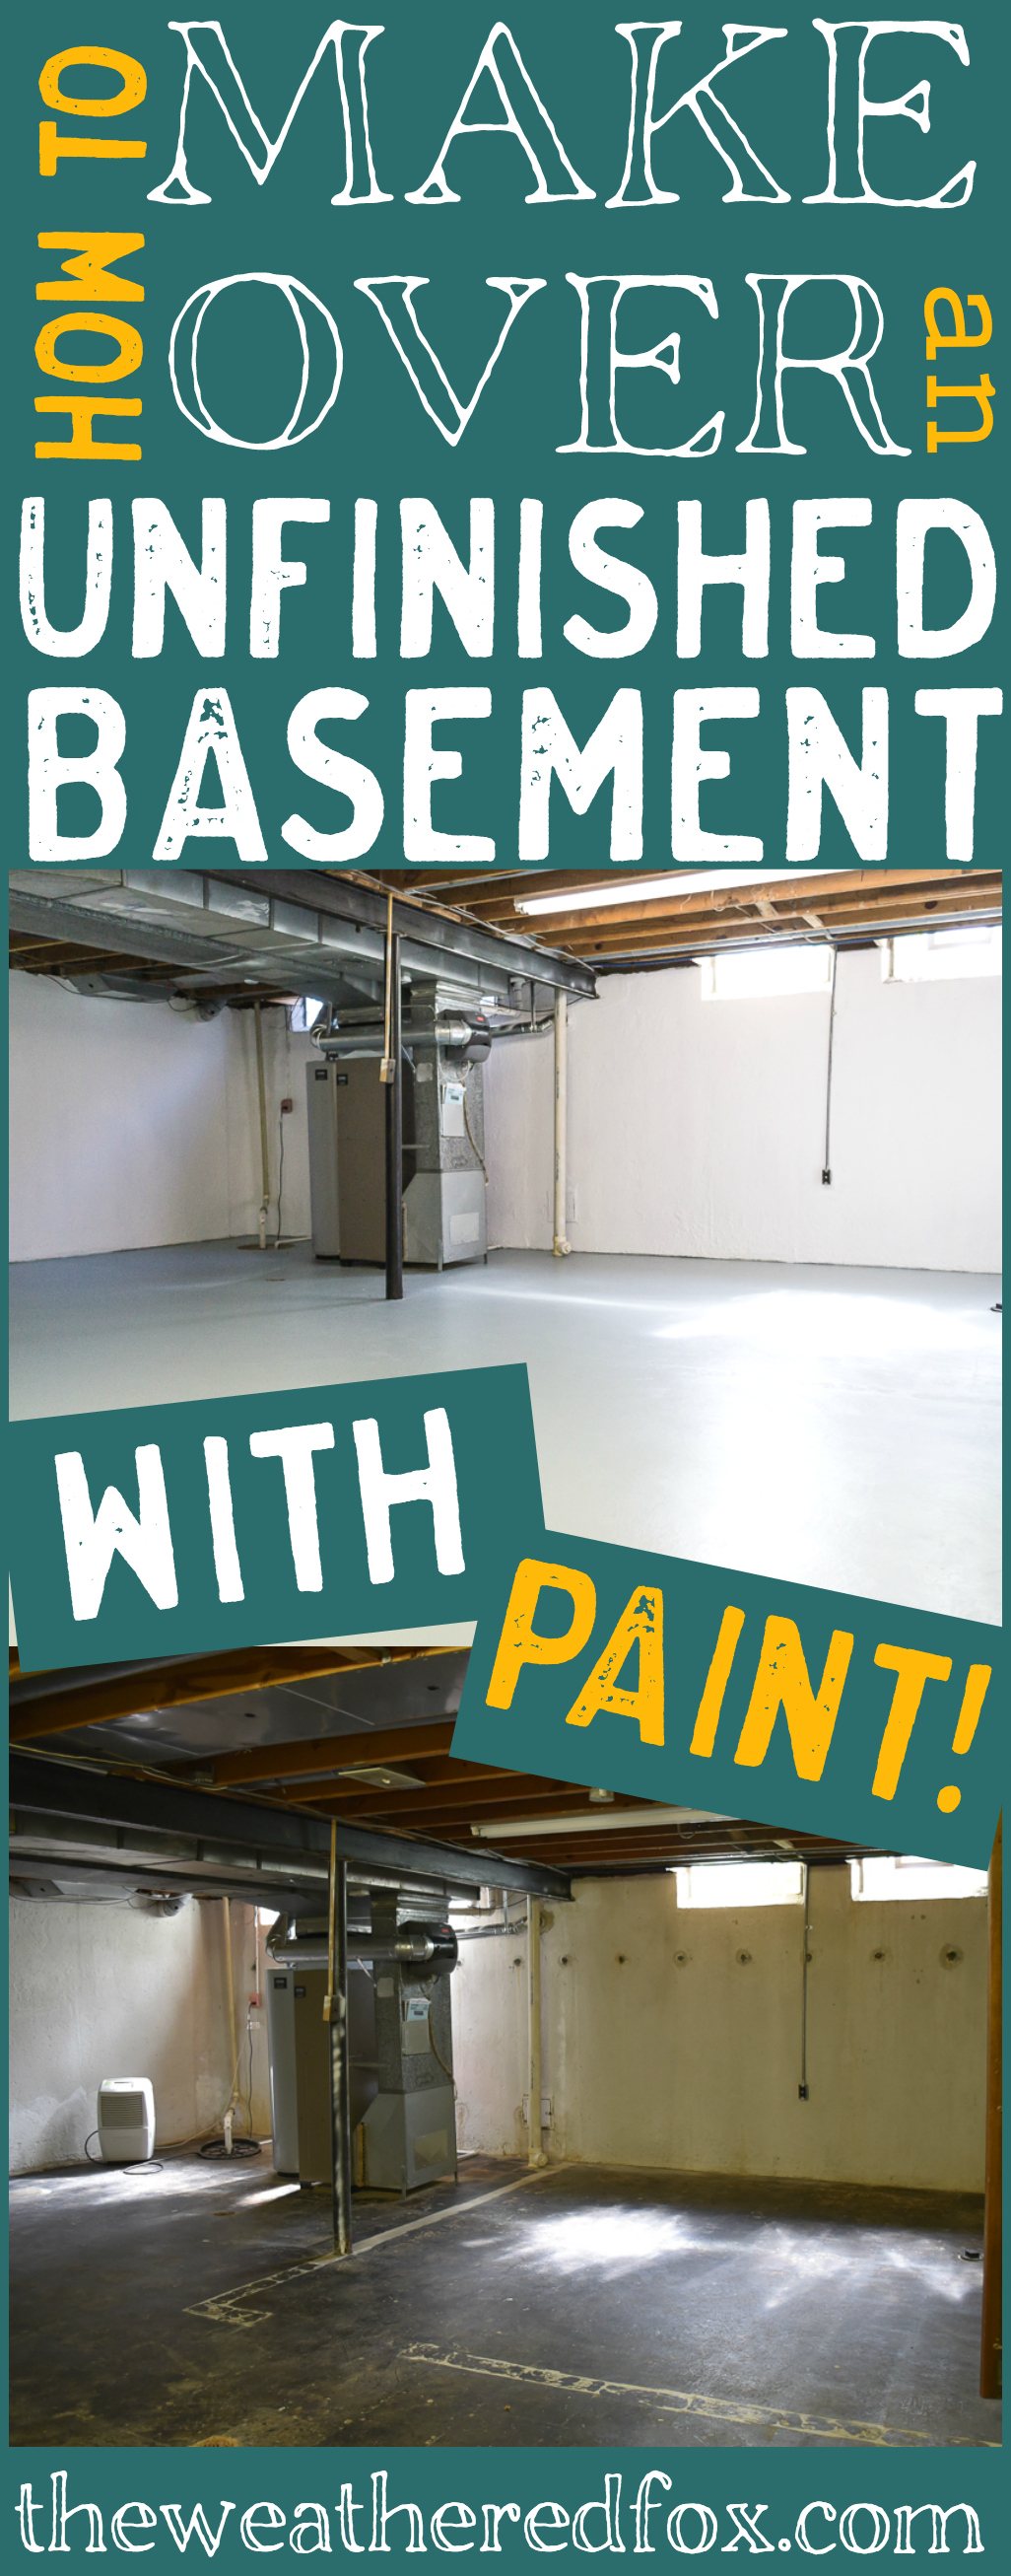 Unfinished basement ideas that sold our house. How to give an unfinished basement a new look with paint.